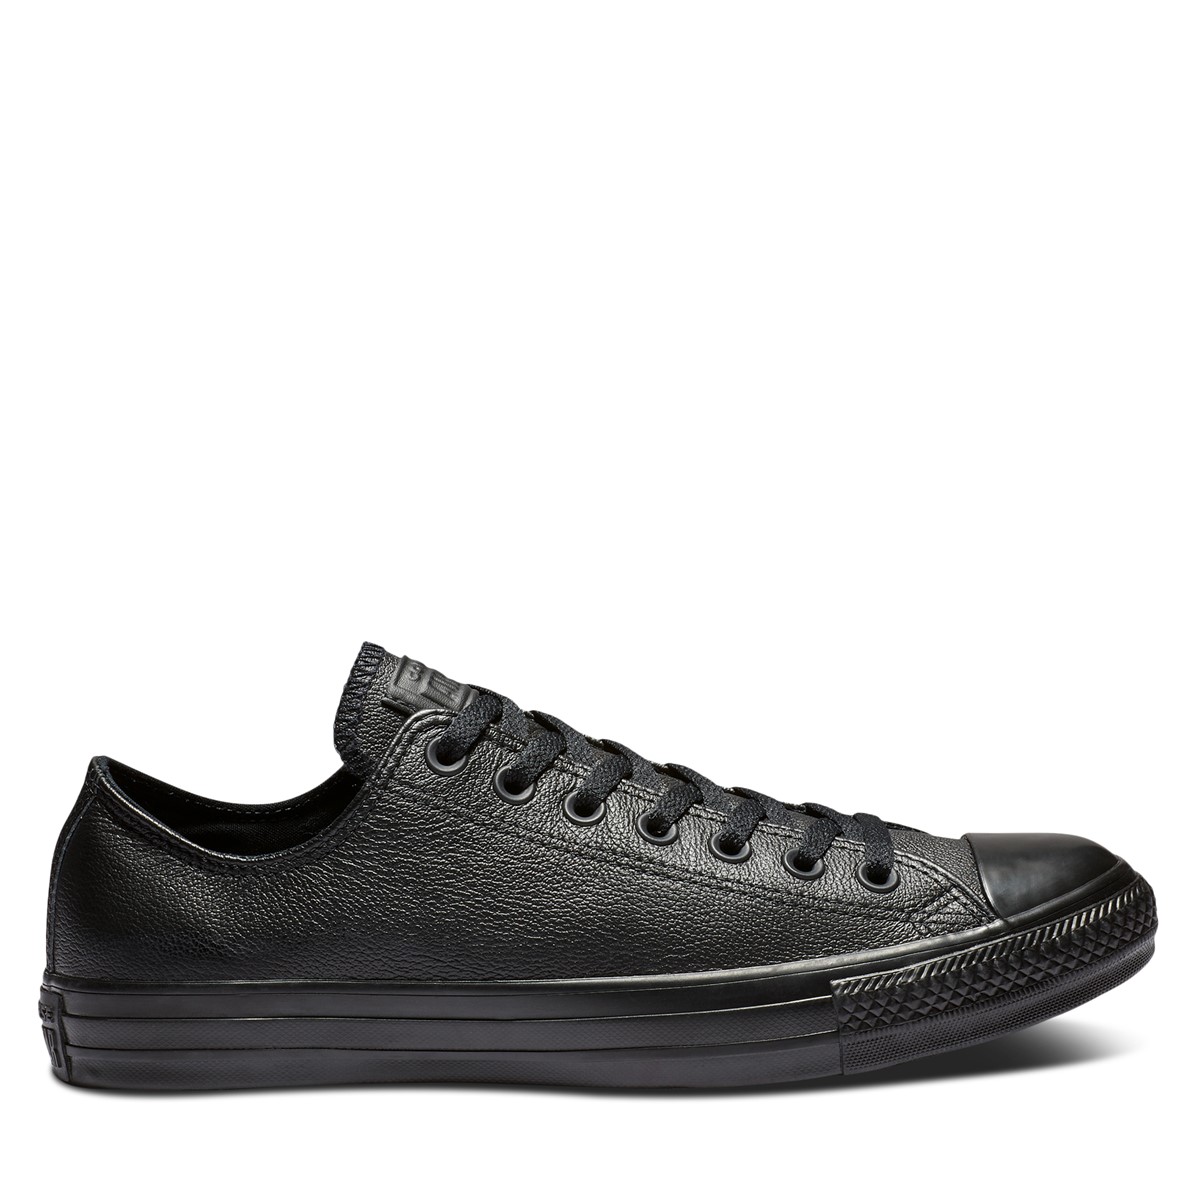 Chuck Taylor All Star Mono Leather Low Top Sneakers in Black